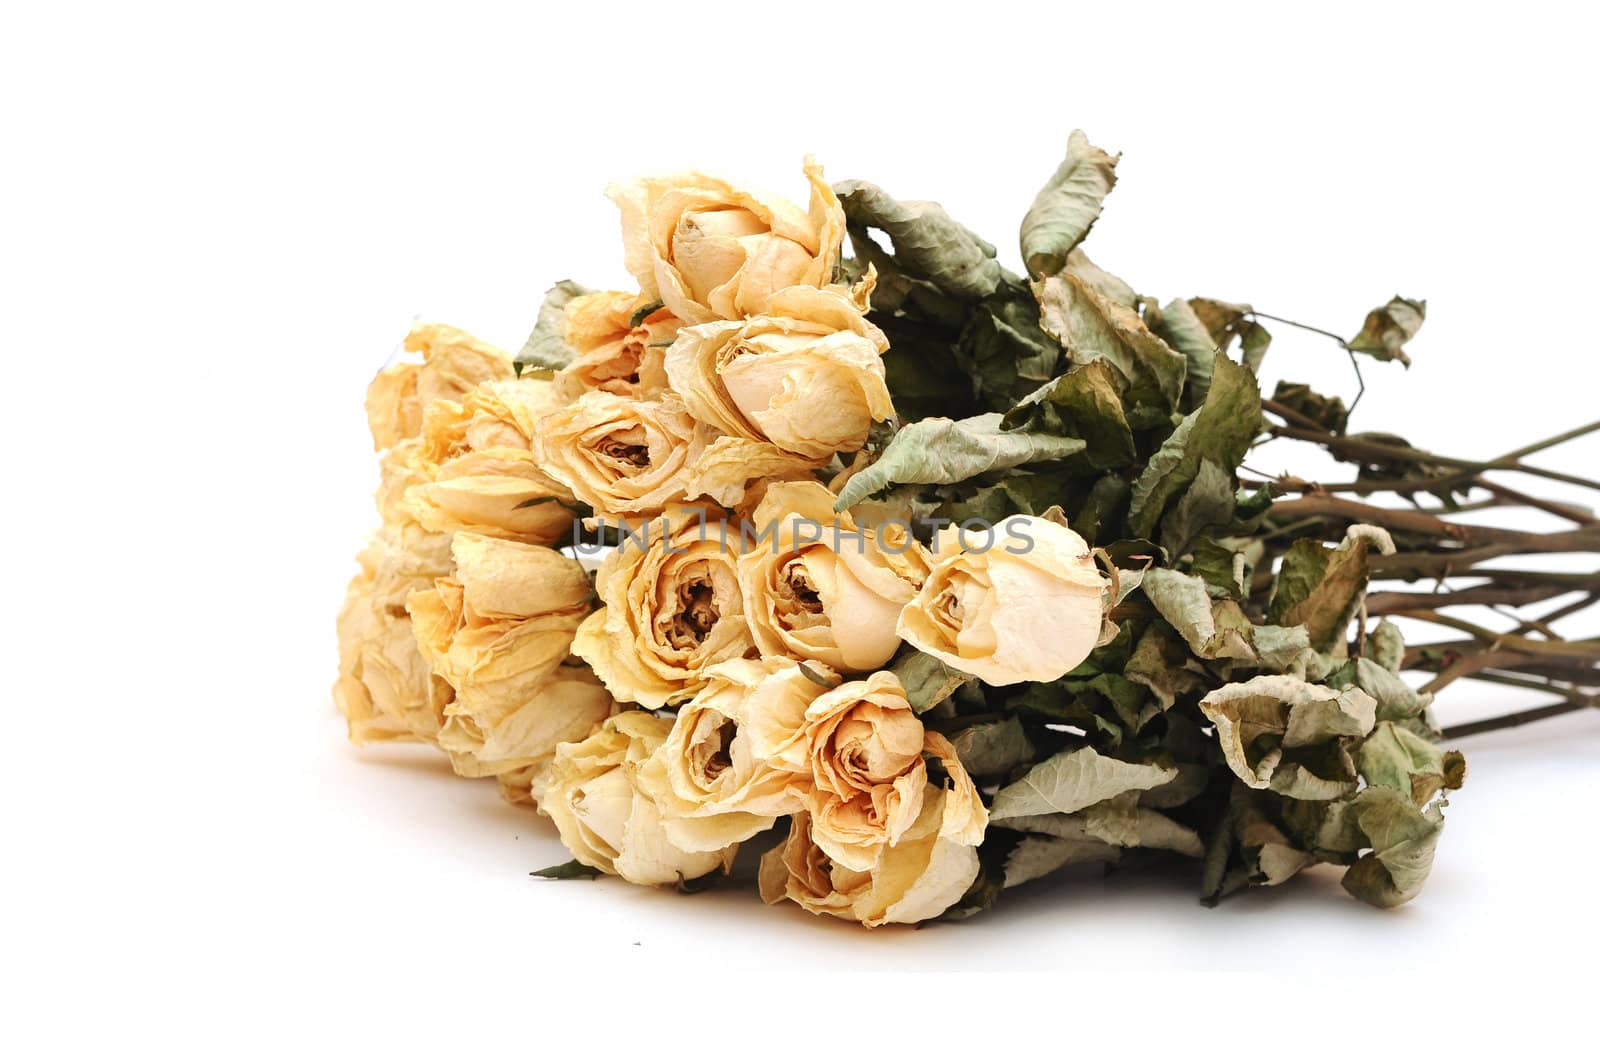 dry roses on a white background  by inxti